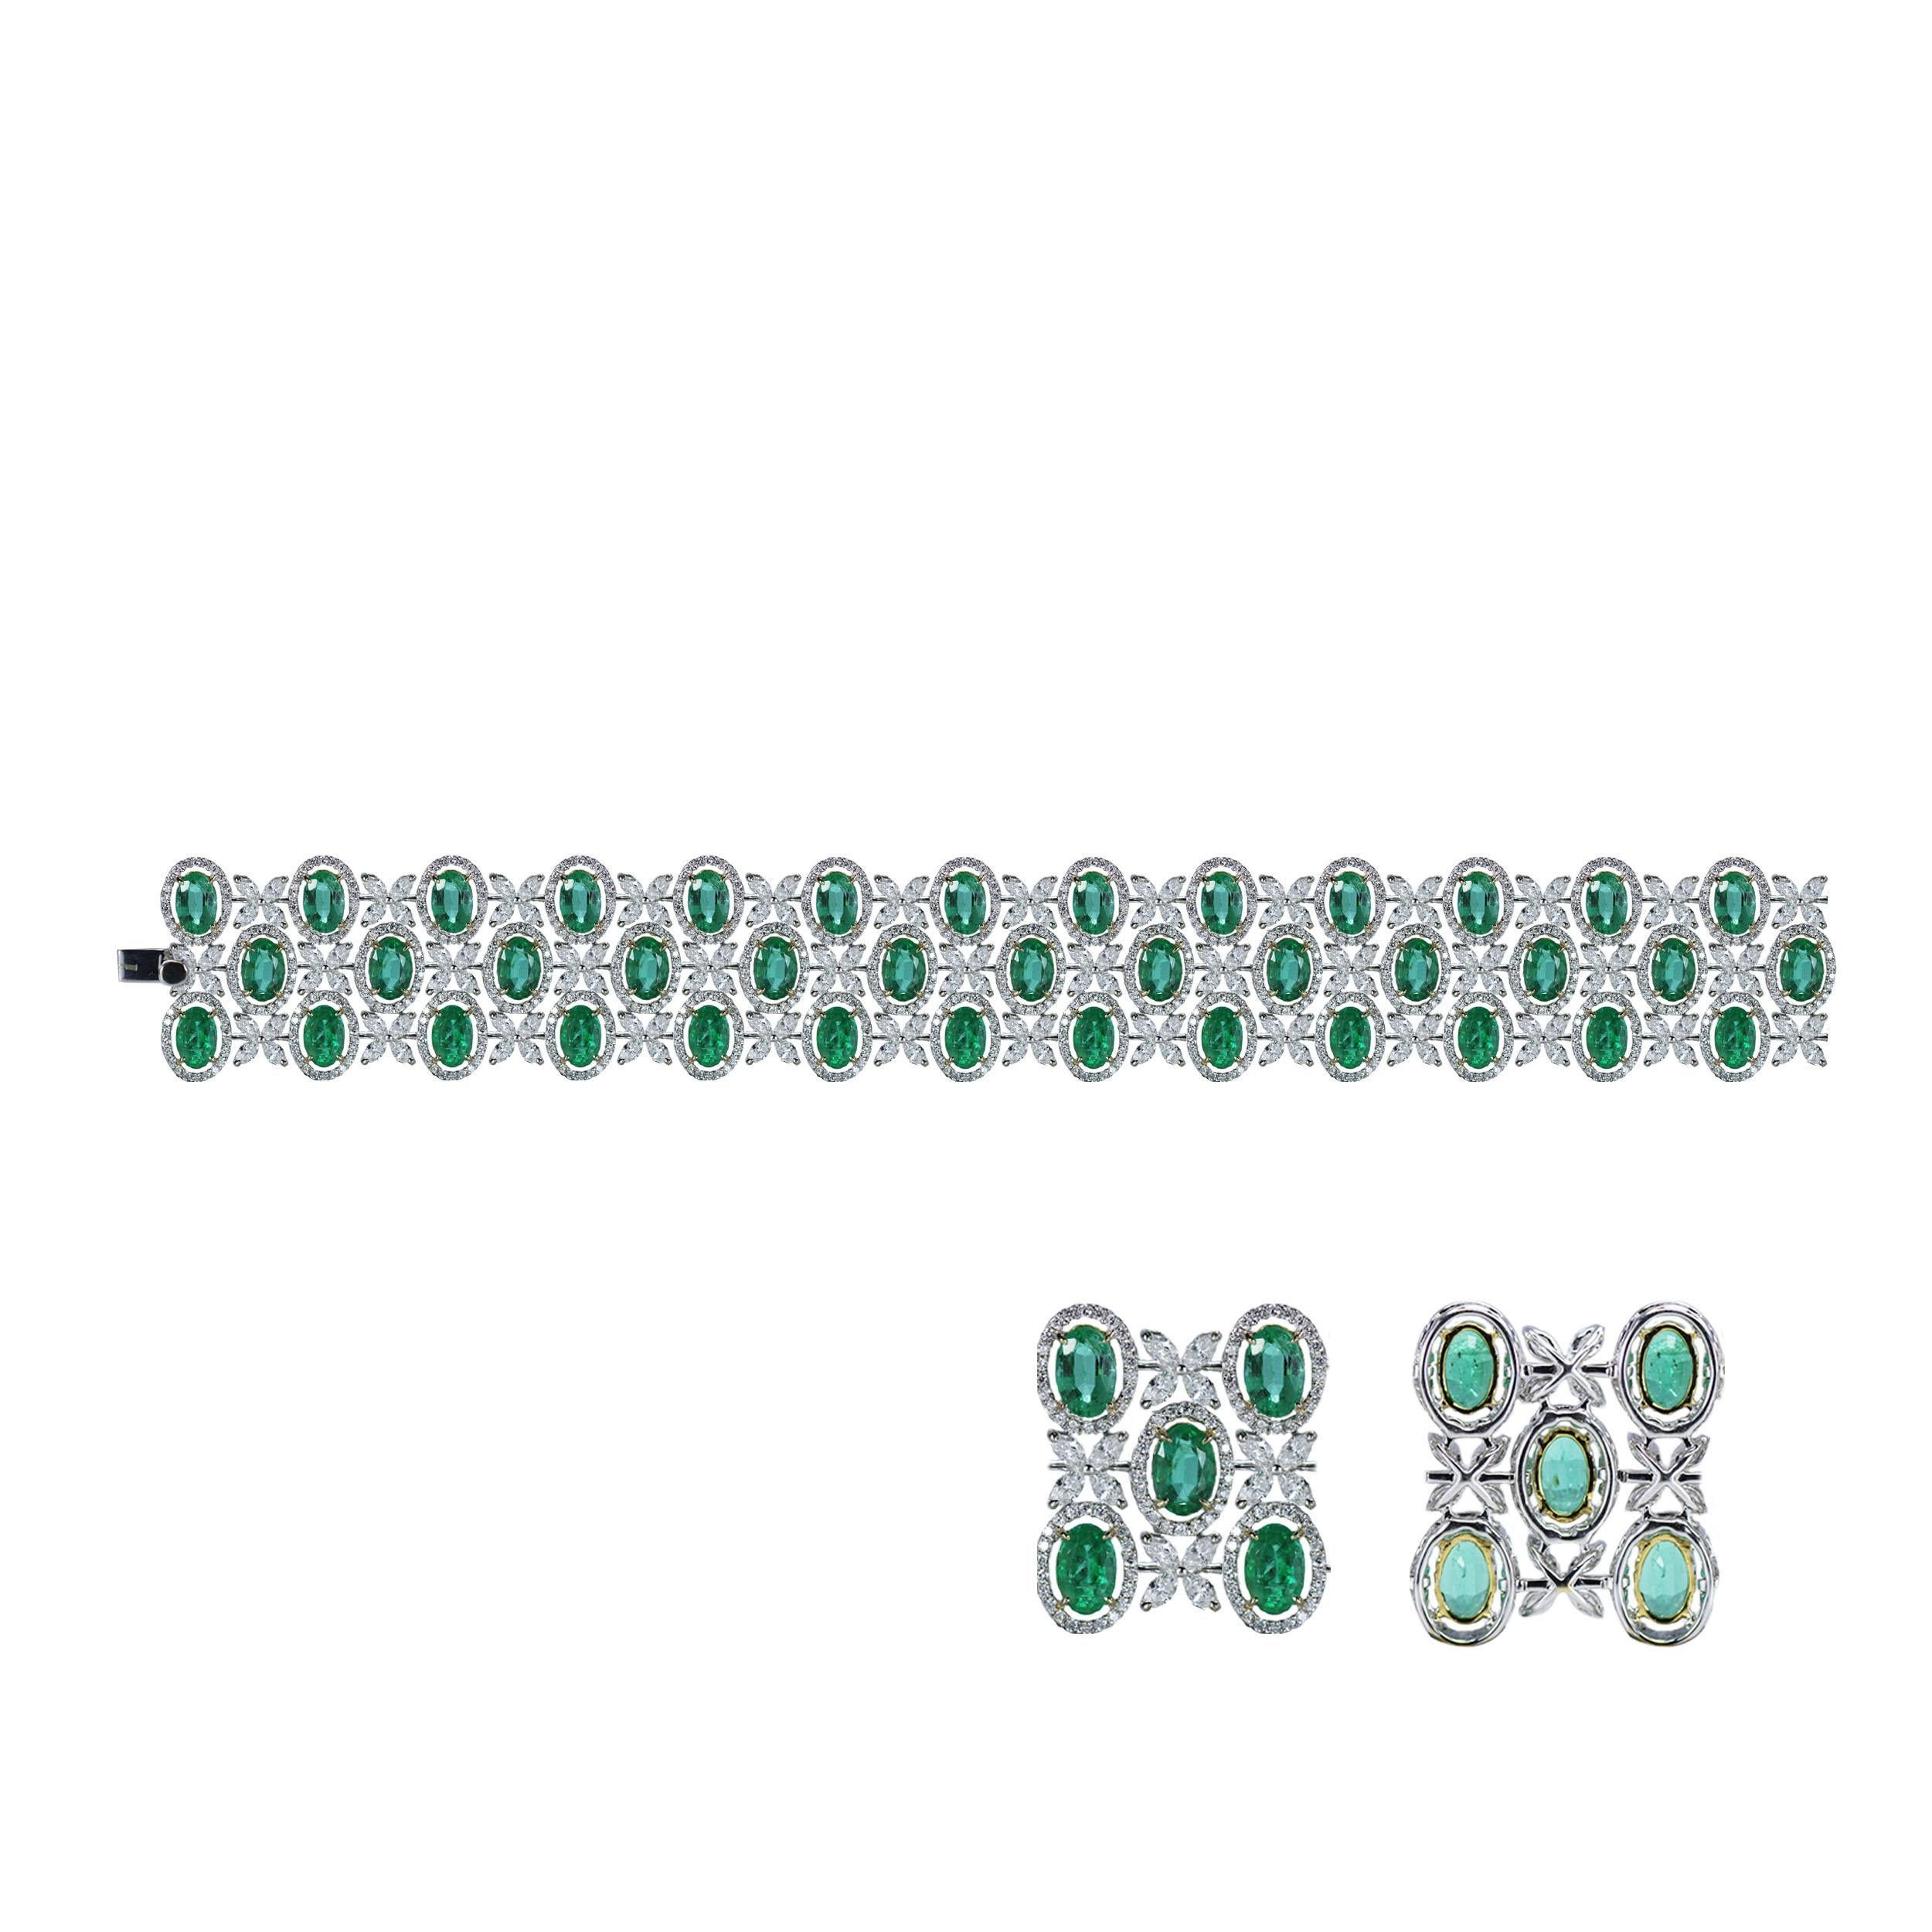 F-G/ VS-SI brilliant cut diamonds and emerald tennis bracelet

The all-encompassing elegance of this 18K yellow gold and white gold tennis bracelet adorned with F-G/ VS-SI brilliant cut diamonds in a sleek prong setting is further accentuated with